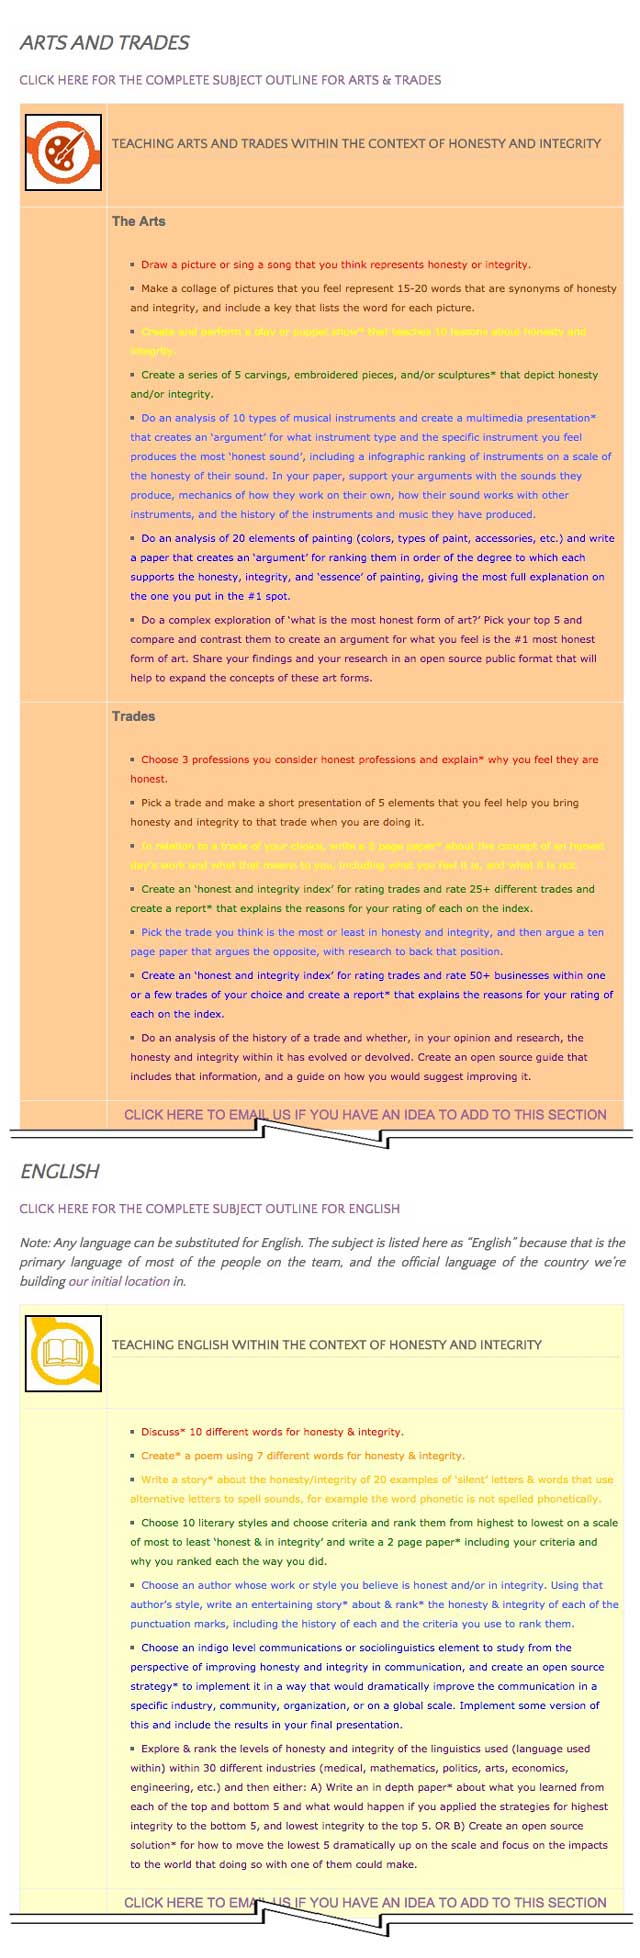 This last week the core team transferred the first 25% of the written content for the Honesty and Integrity Lesson Plan to the website, as you see here. This lesson plan purposed to teach all subjects, to all learning levels, in any learning environment, using the central theme of “Honesty & Integrity” is now 25% completed on our website.